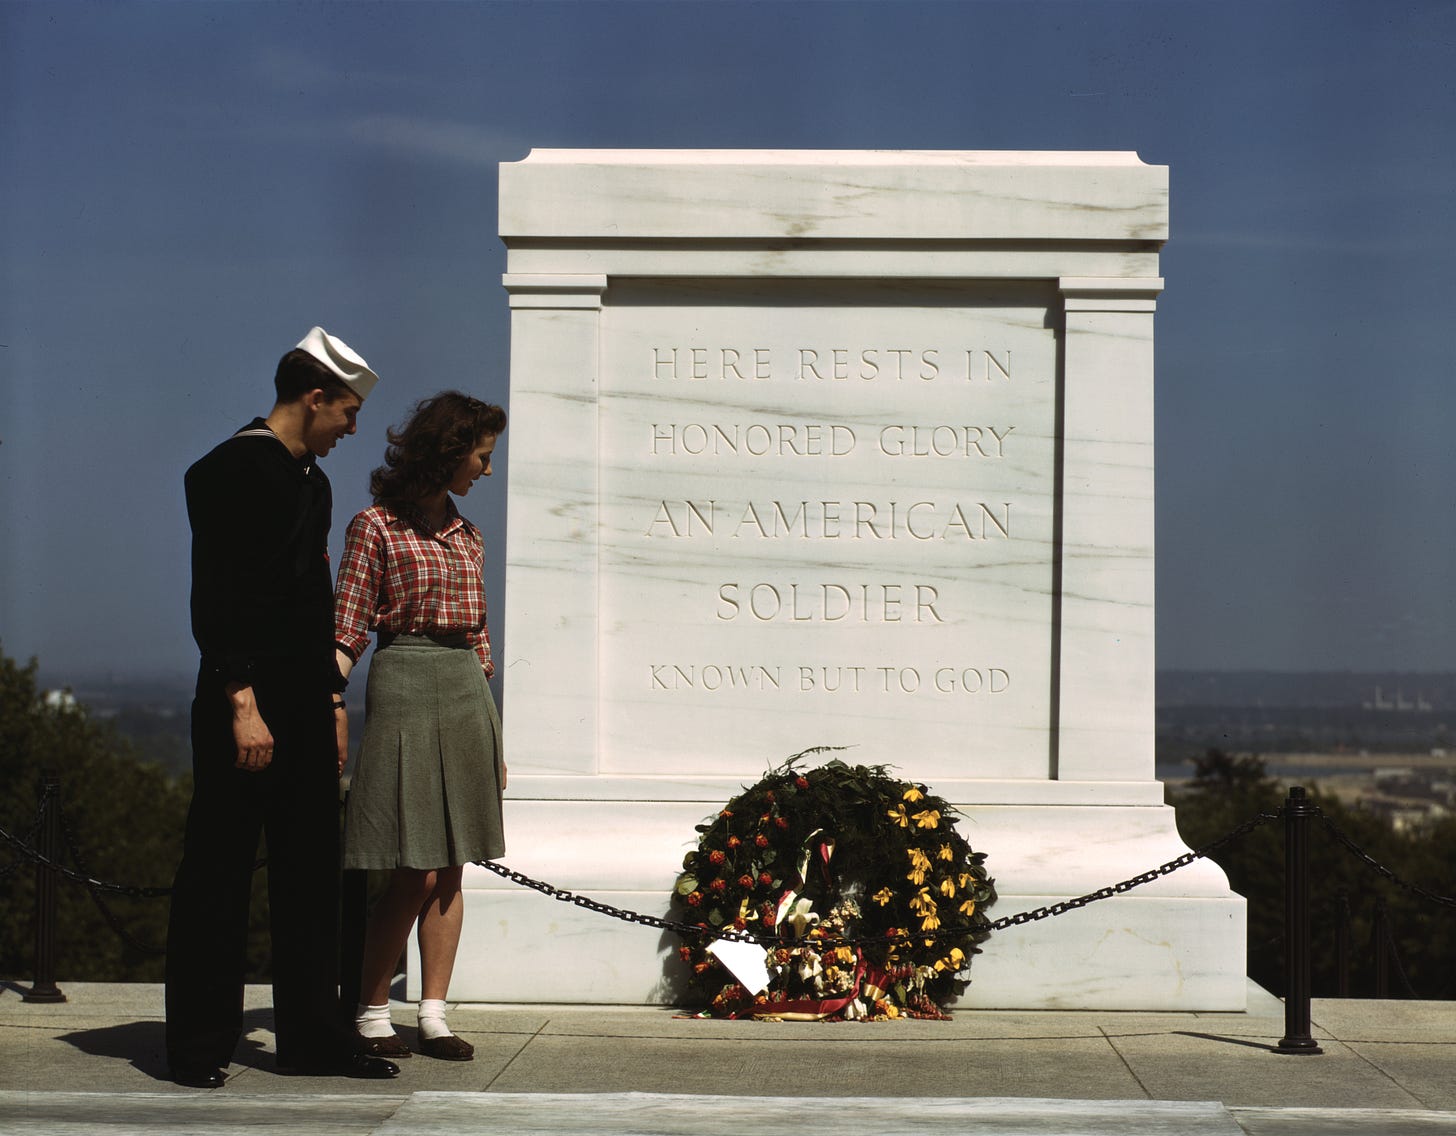 Tomb of the Unknown Soldier (Arlington) - Wikipedia